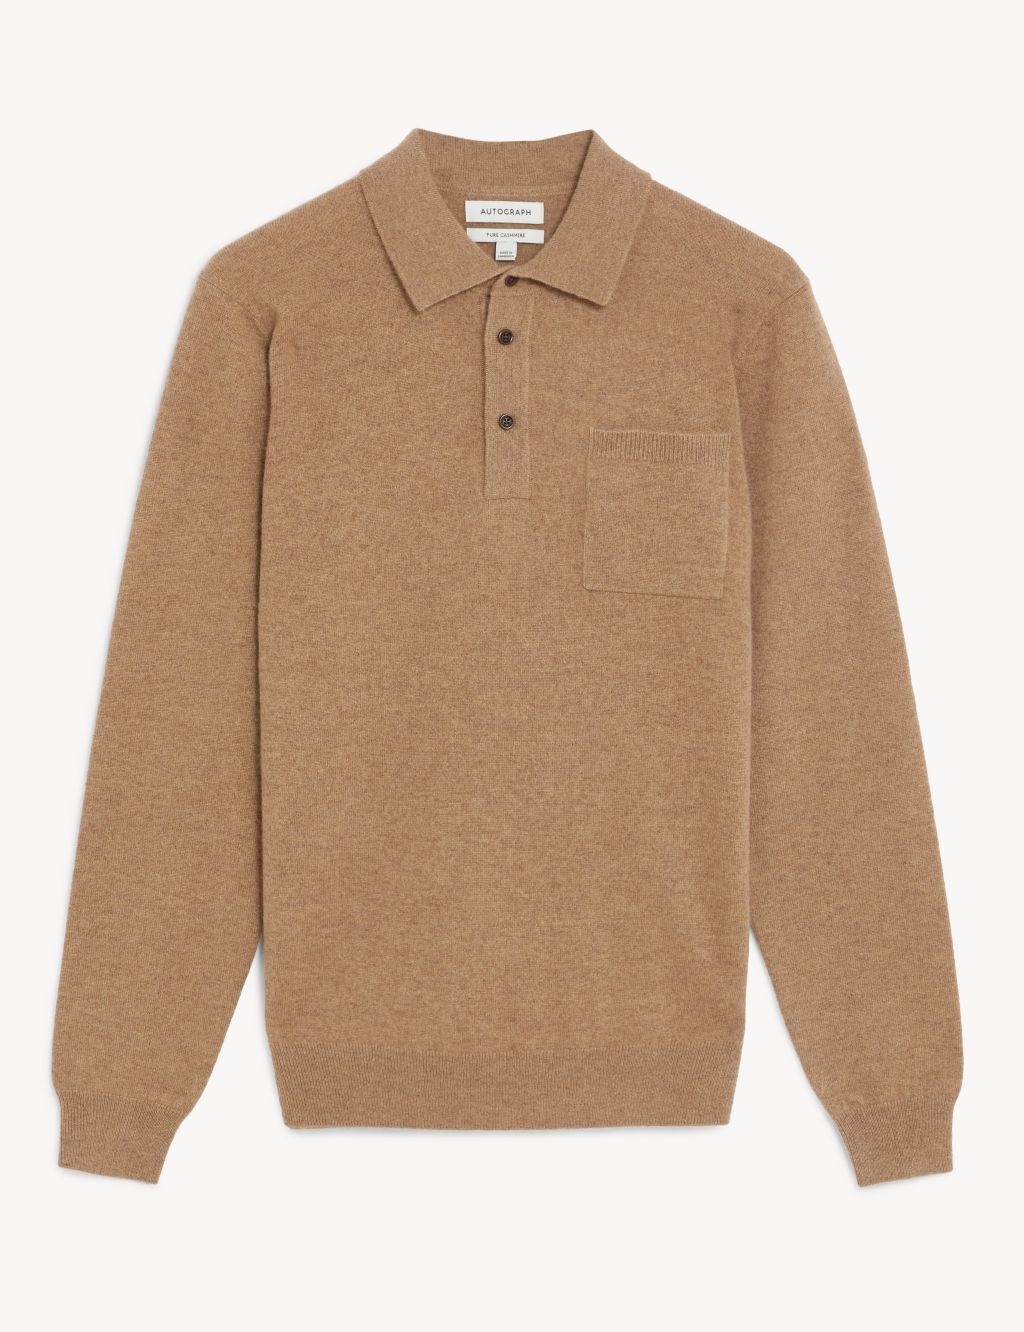 Pure Cashmere Knitted Polo Shirt image 1